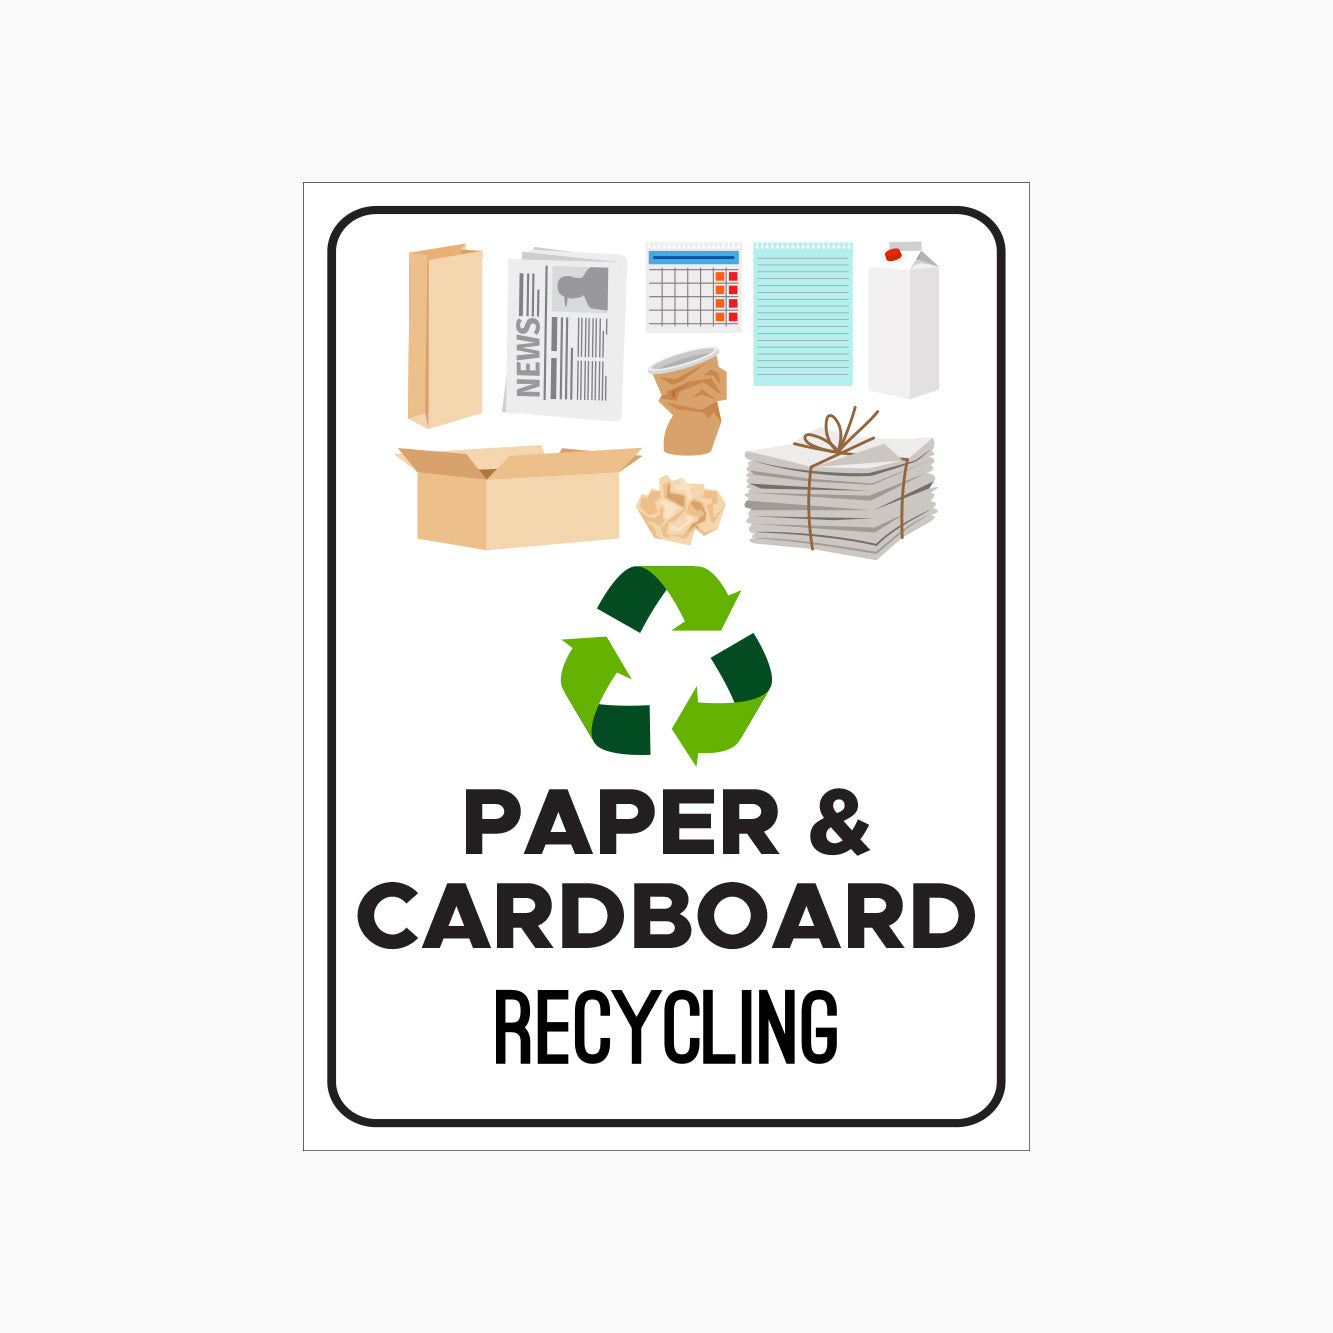 PAPER & CARDBOARD RECYCLING SIGN - Recycle Paper Cardboard sign